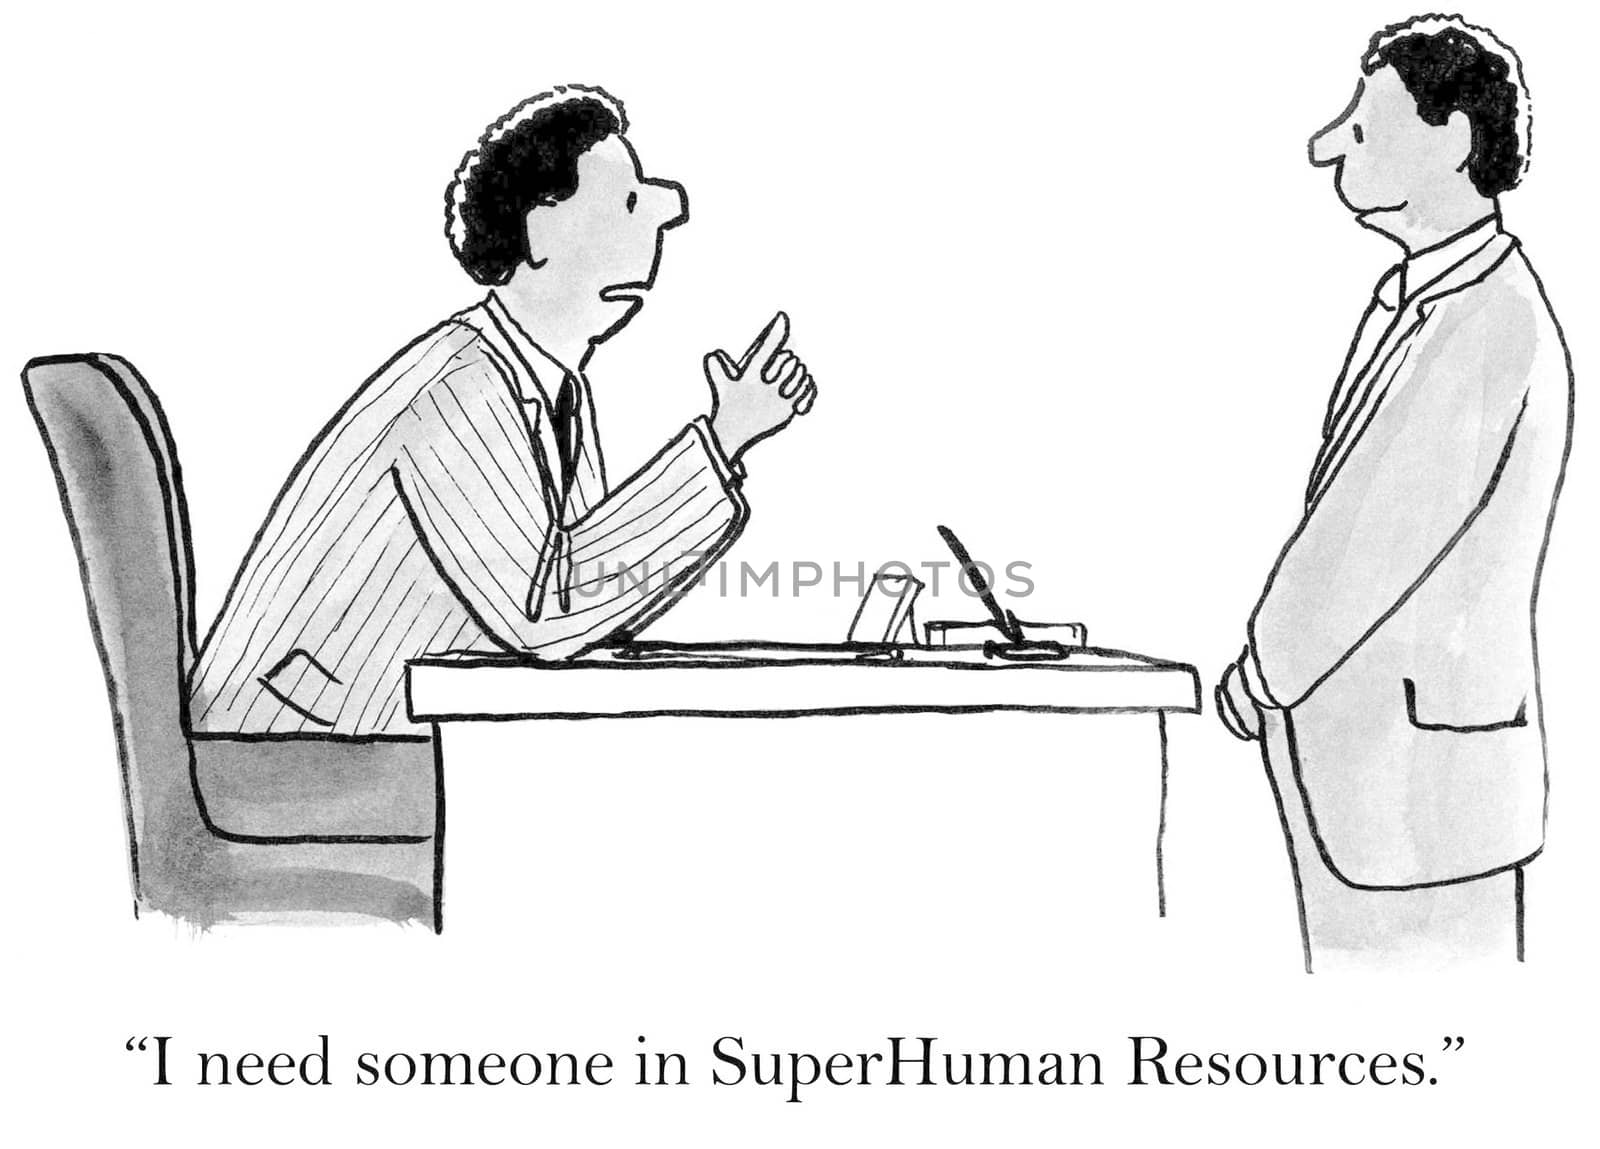 "I need someone in Super Human Resources."